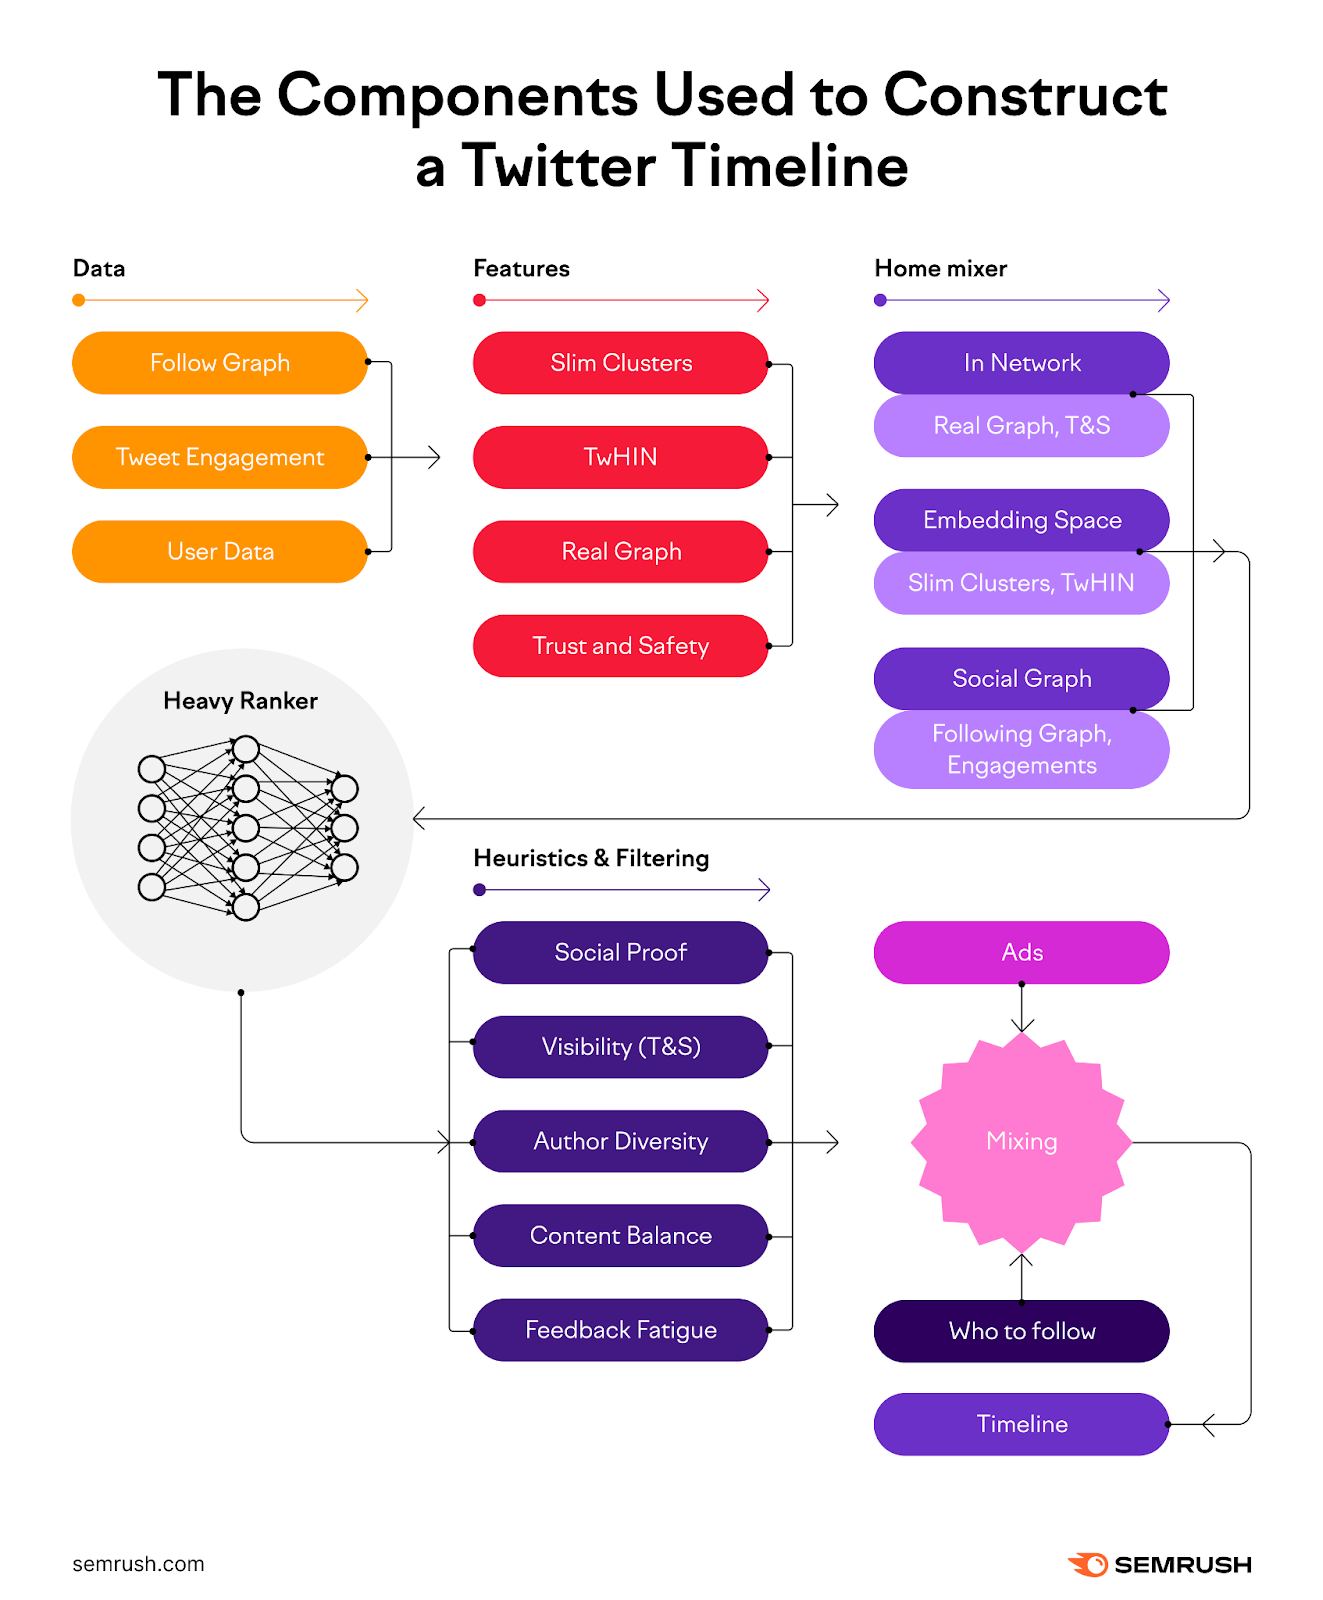 An infographic showing the components used to construct a Twitter timeline